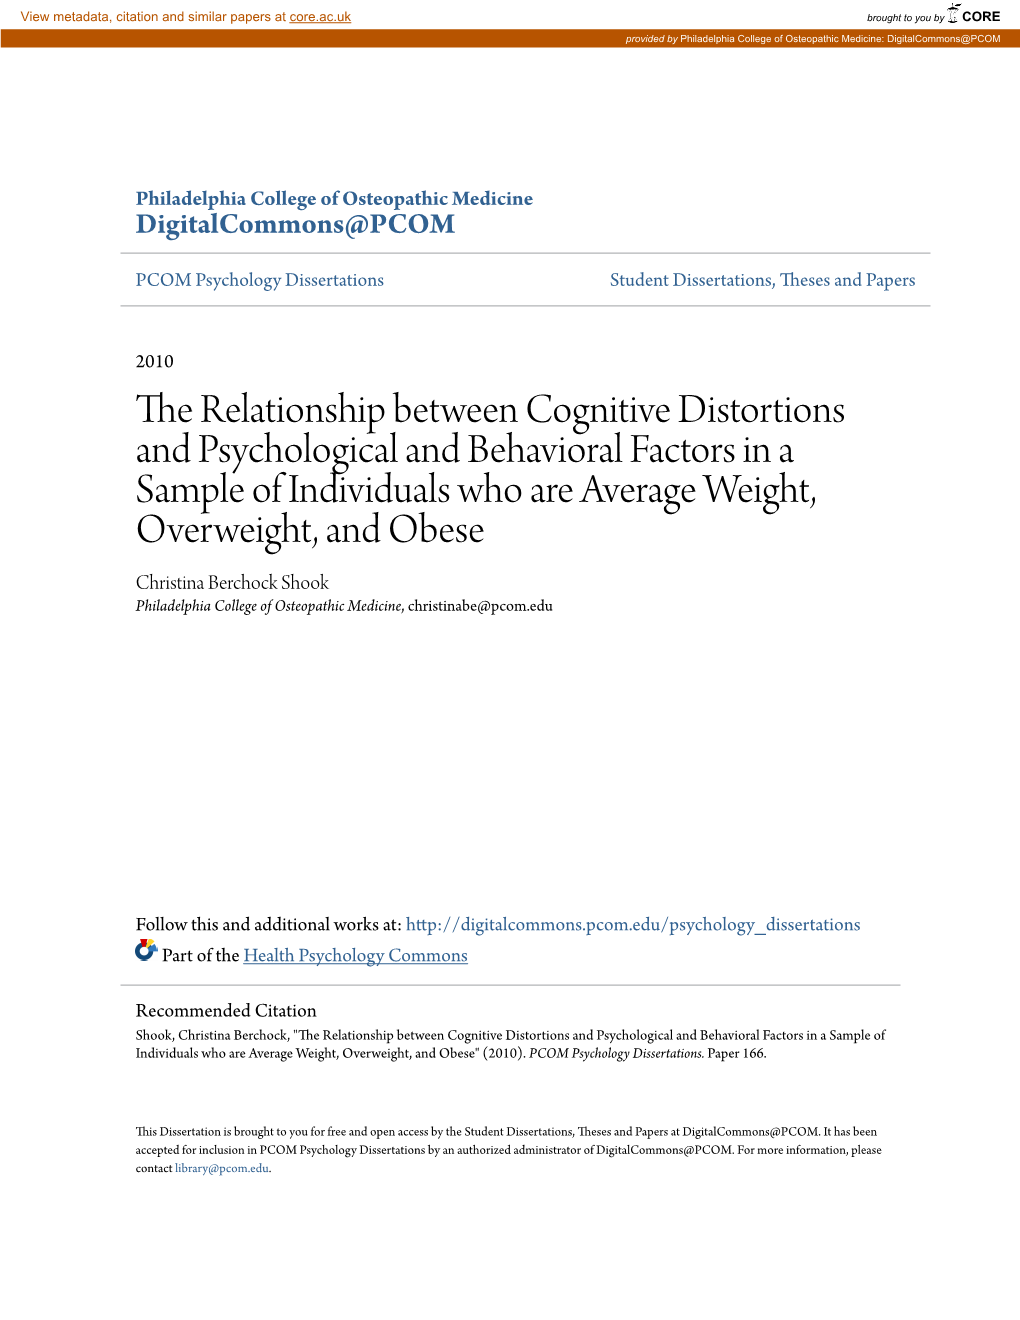 The Relationship Between Cognitive Distortions and Psychological and Behavioral Factors in a Sample of Individuals Who Are Avera